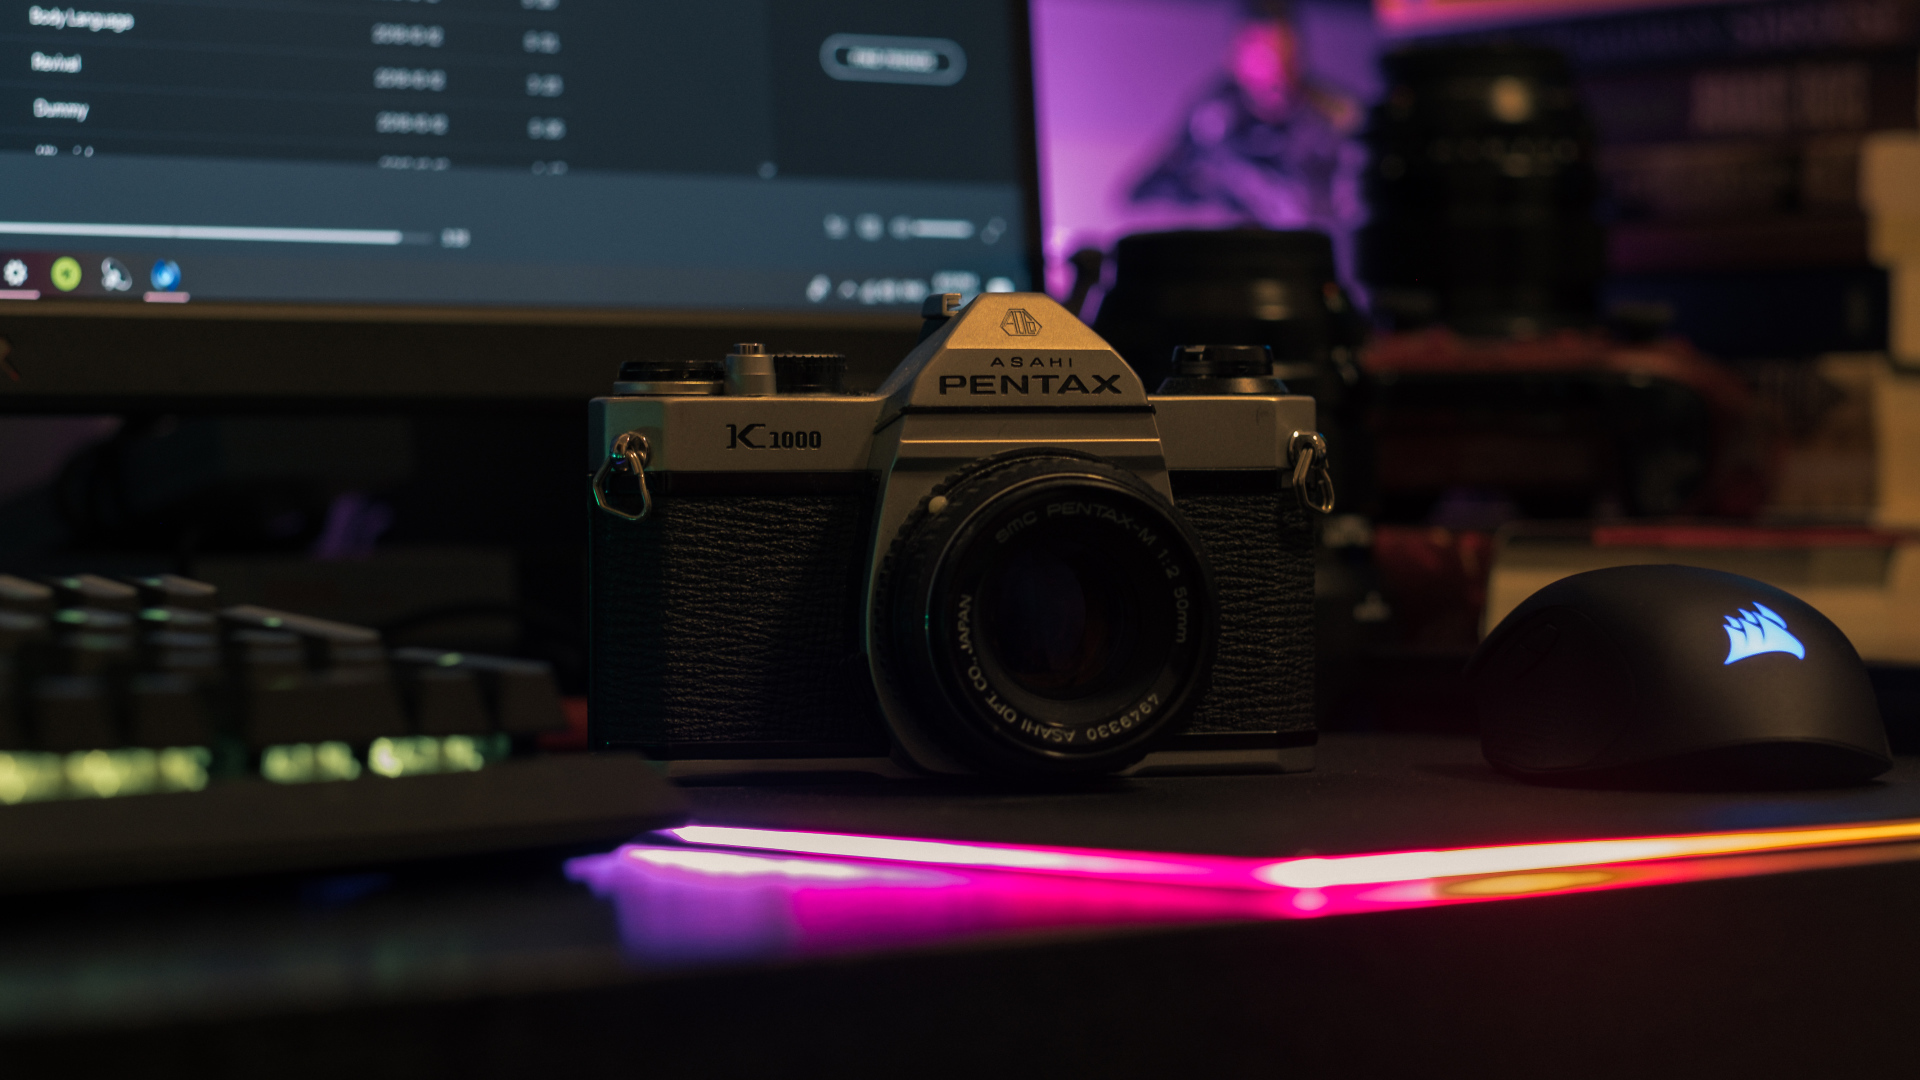 Pentax camera on the table with a computer